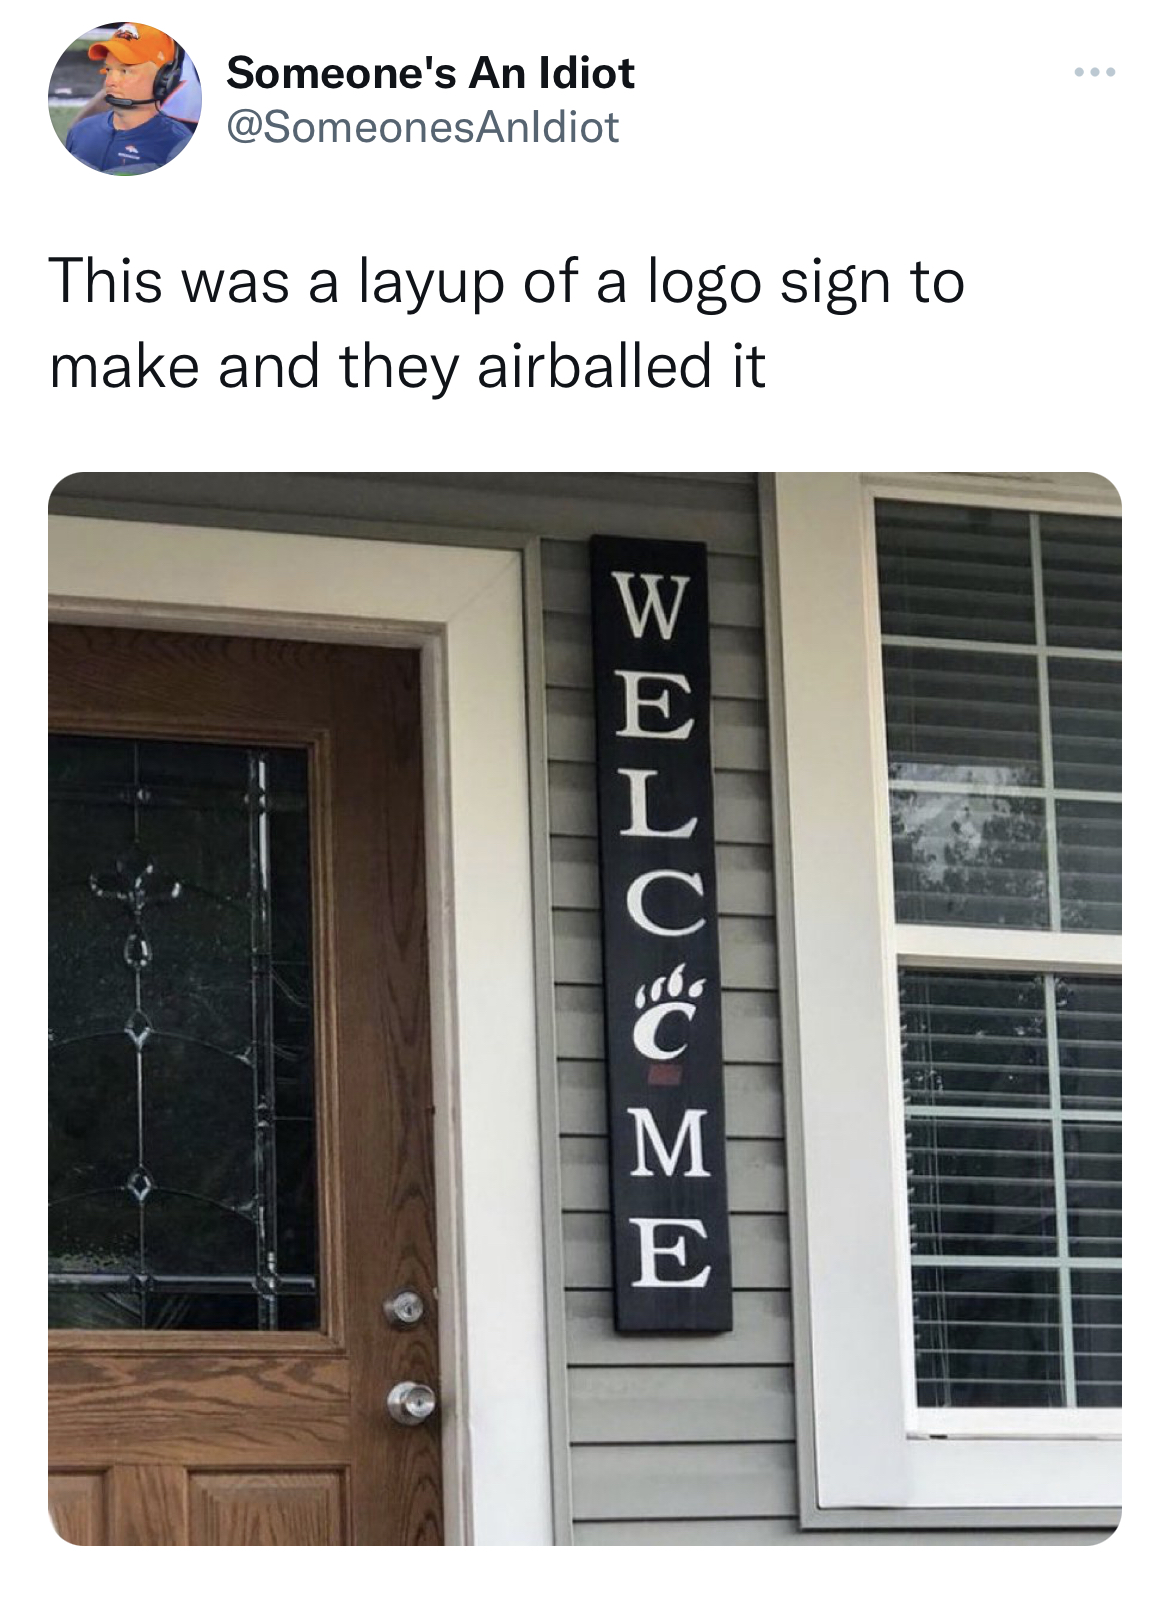 filthy and funny tweet - window - Someone's An Idiot This was a layup of a logo sign to make and they airballed it Welceme www